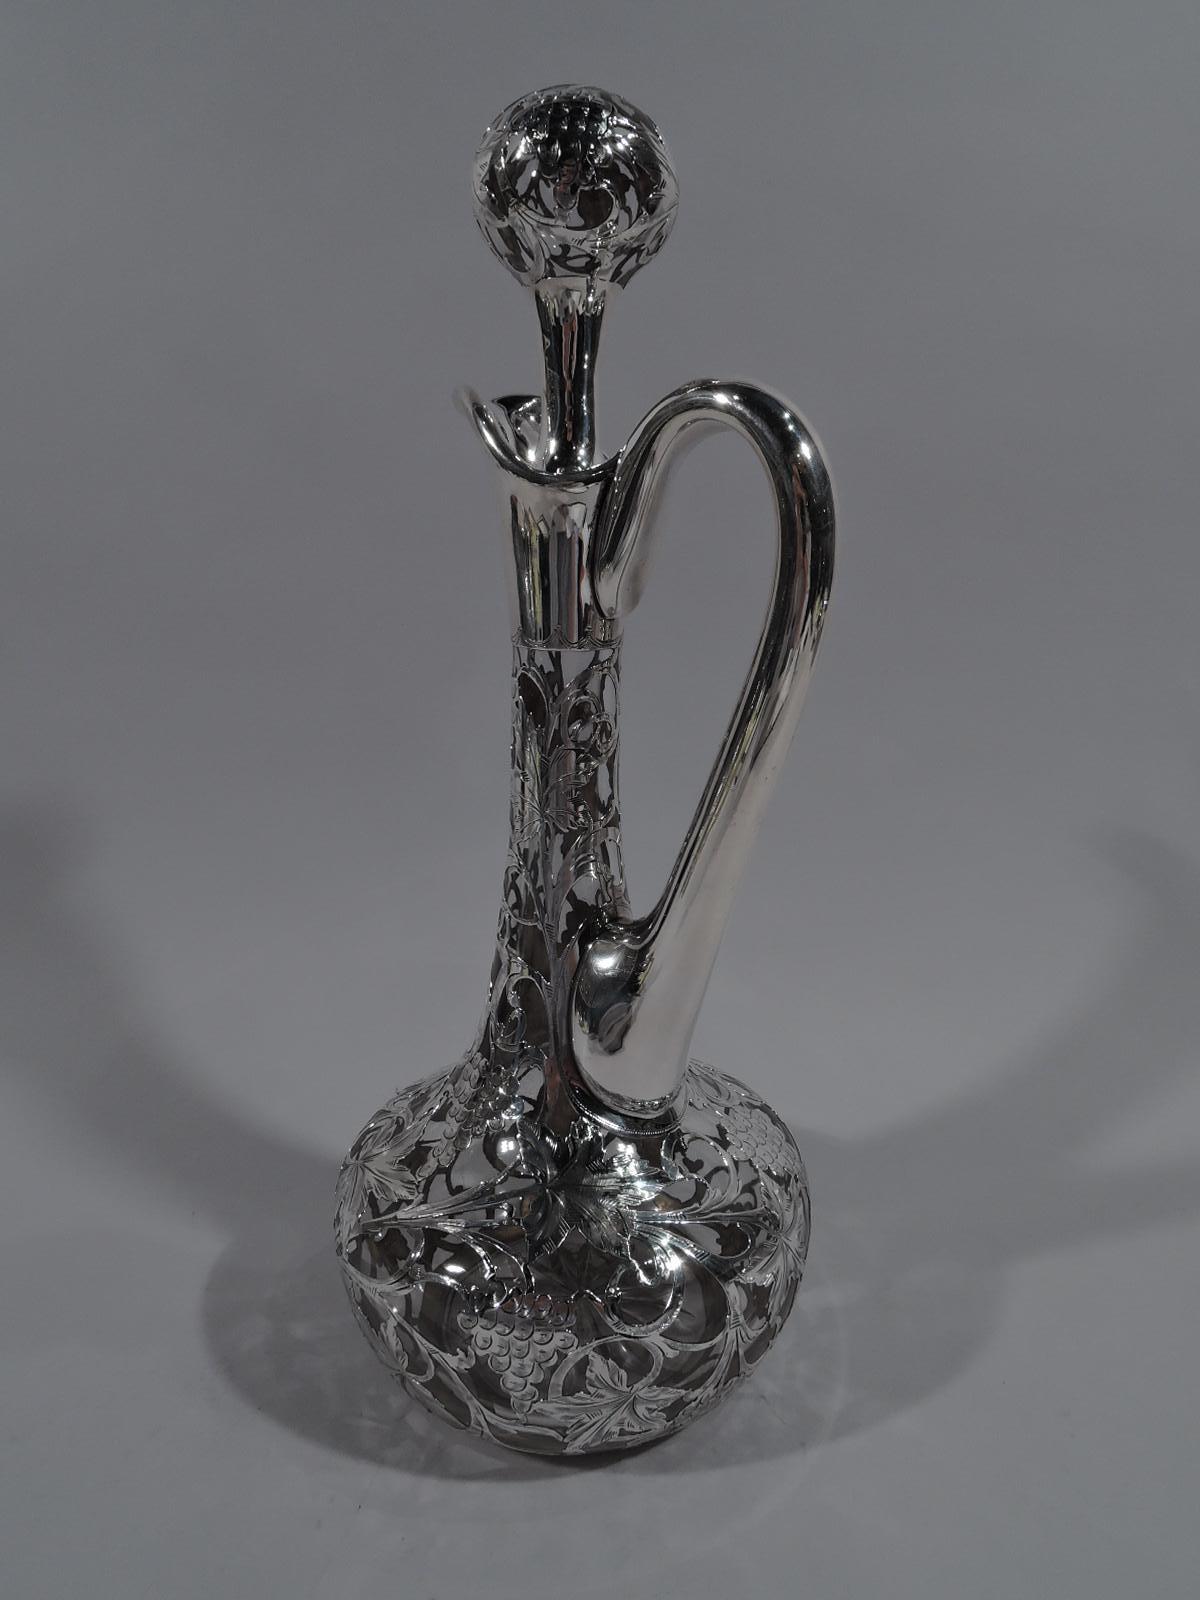 Turn of the century Art Nouveau clear glass decanter with engraved silver overlay. Made by Alvin in Providence. Globular body with high-looping handle, upward tapering cylindrical neck, and helmet mouth. Ball stopper with short plug. Dense and